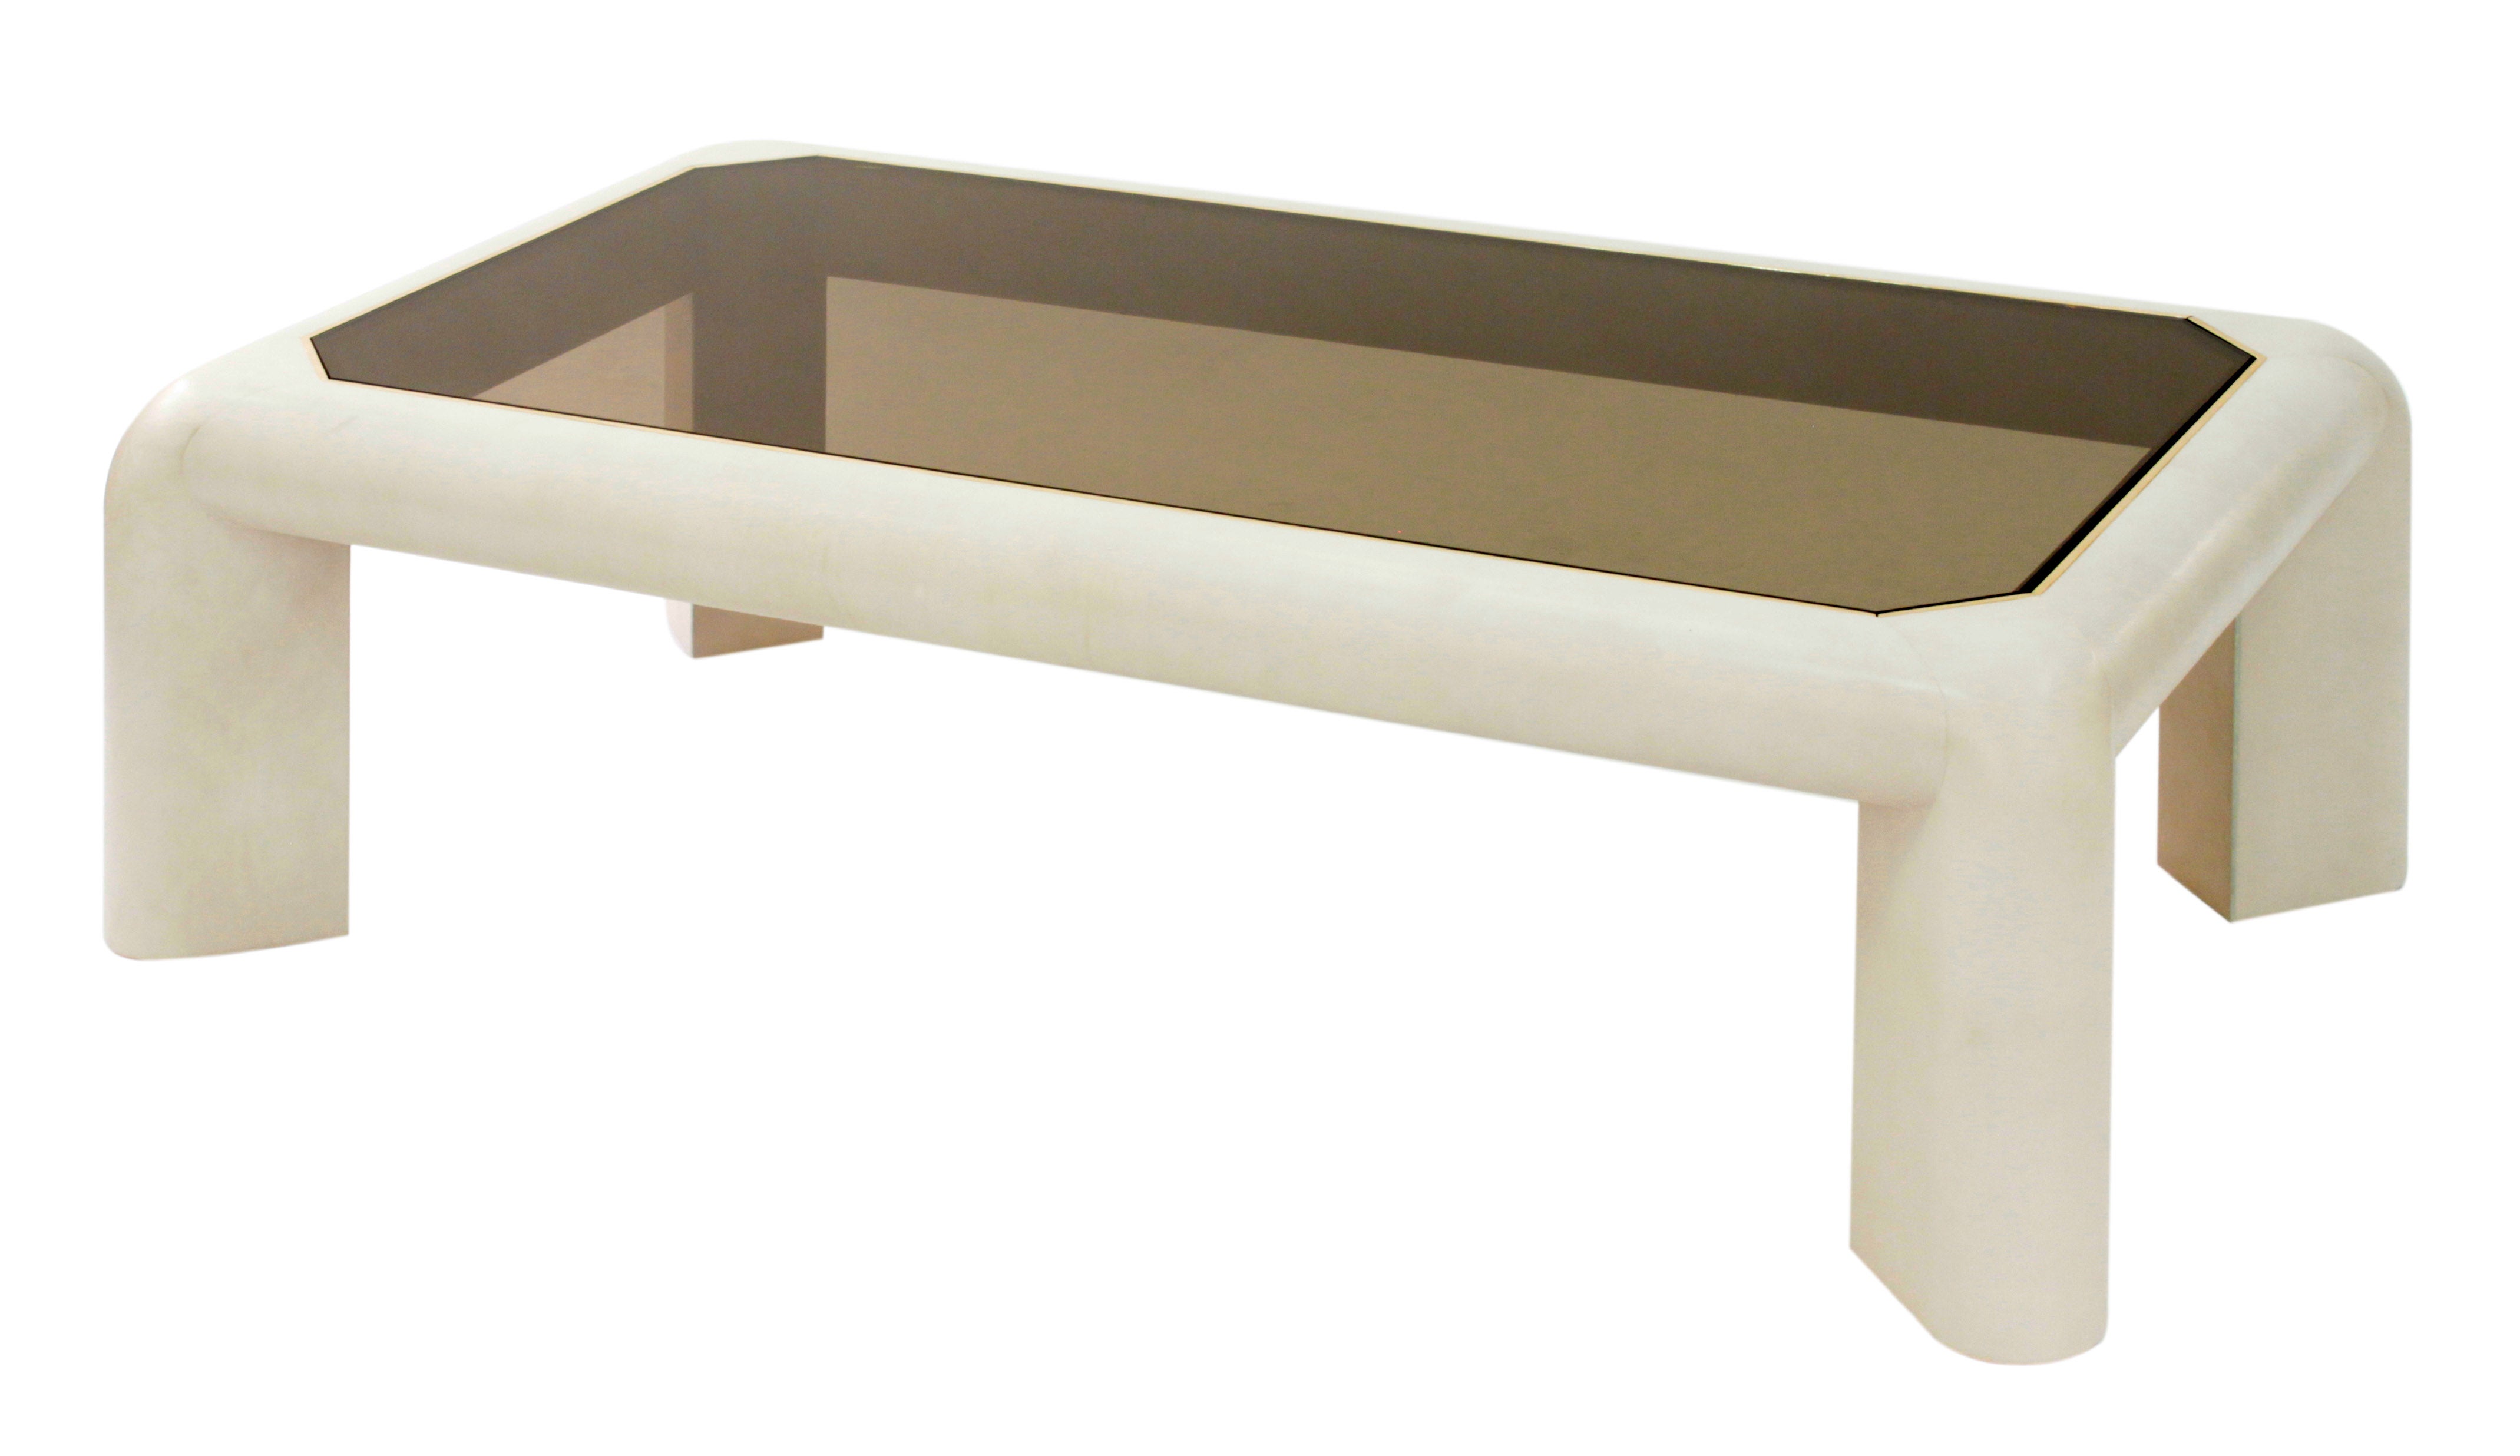 "Mark II" Coffee Table in Cream Leather by Karl Springer